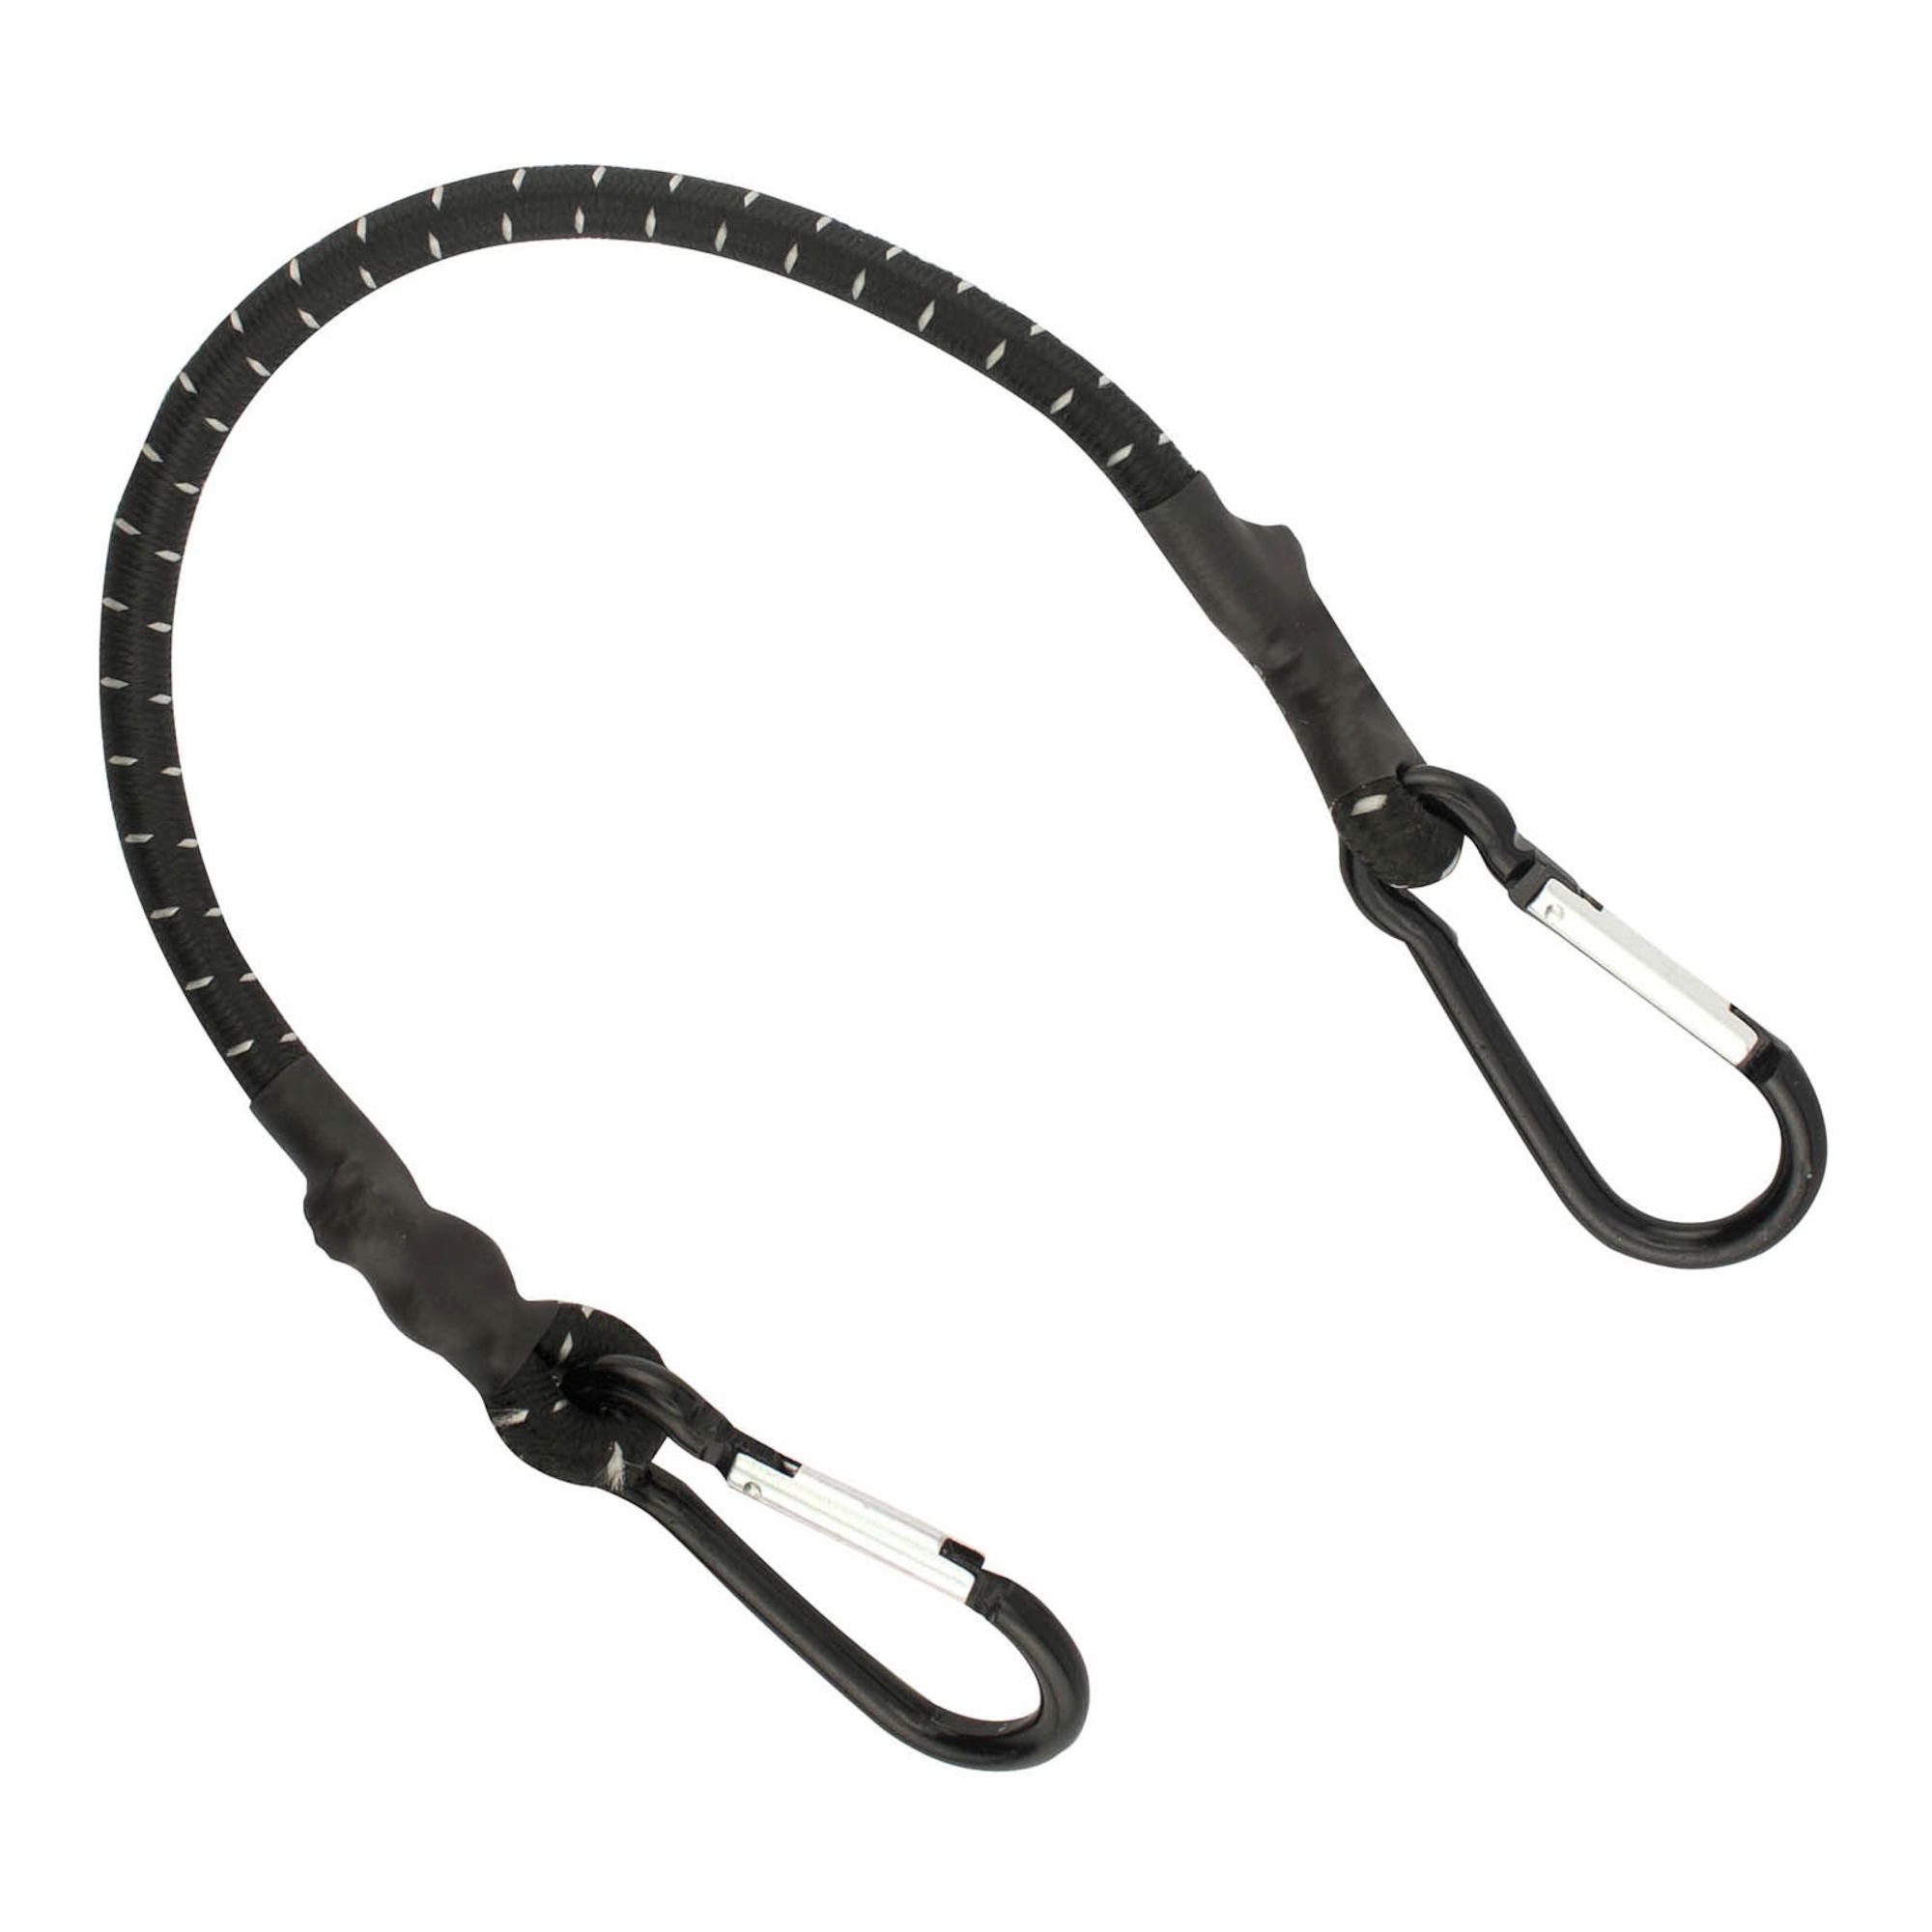 Stretch cord with carabiner hook from ERICKSON